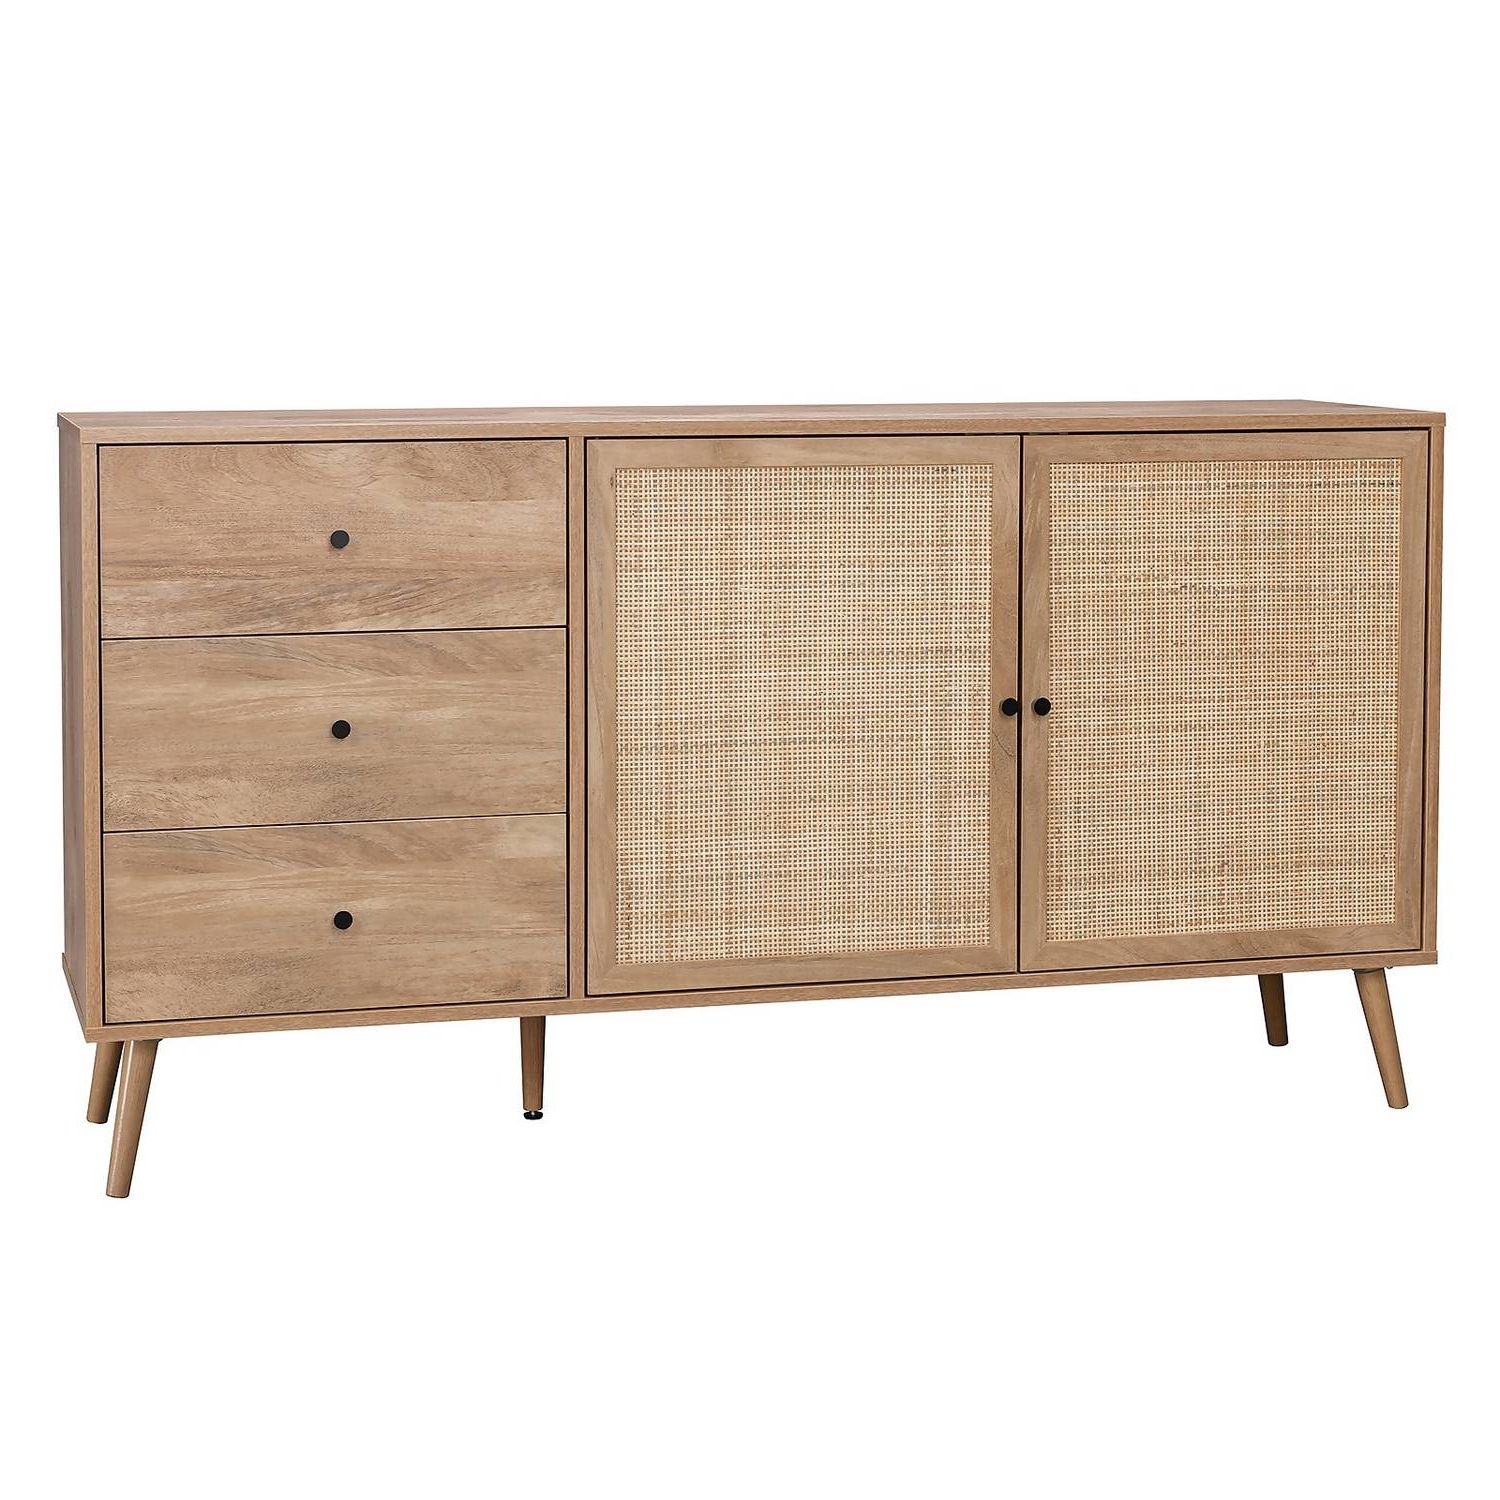 Kubu Rattan Large Sideboard | Homebase For Assembled Rattan Sideboards (View 16 of 20)